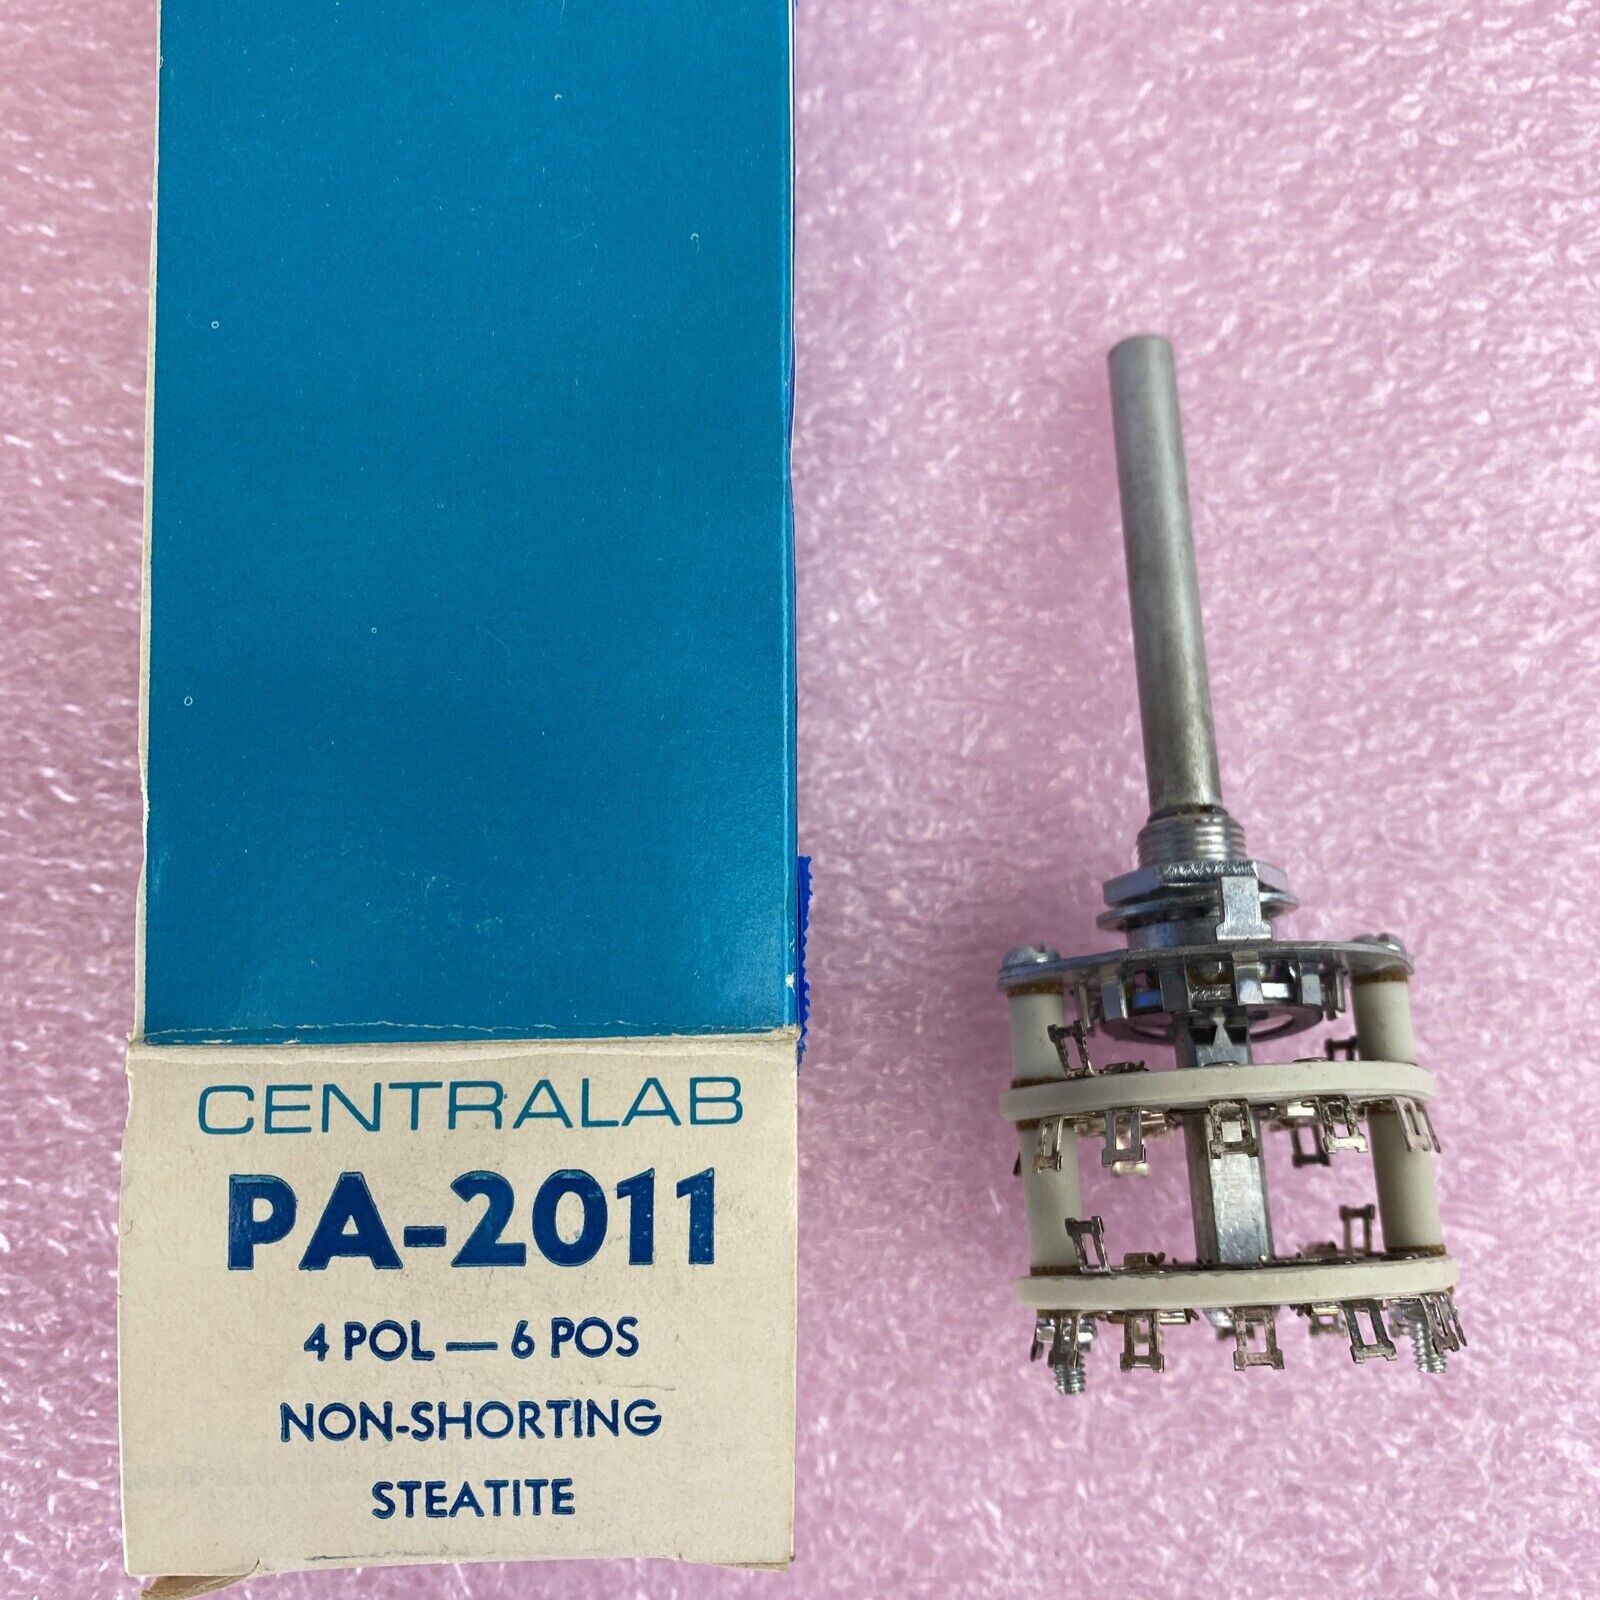 Centralab PA-2011 4 pol 6 pos non-shorting Steatite switch